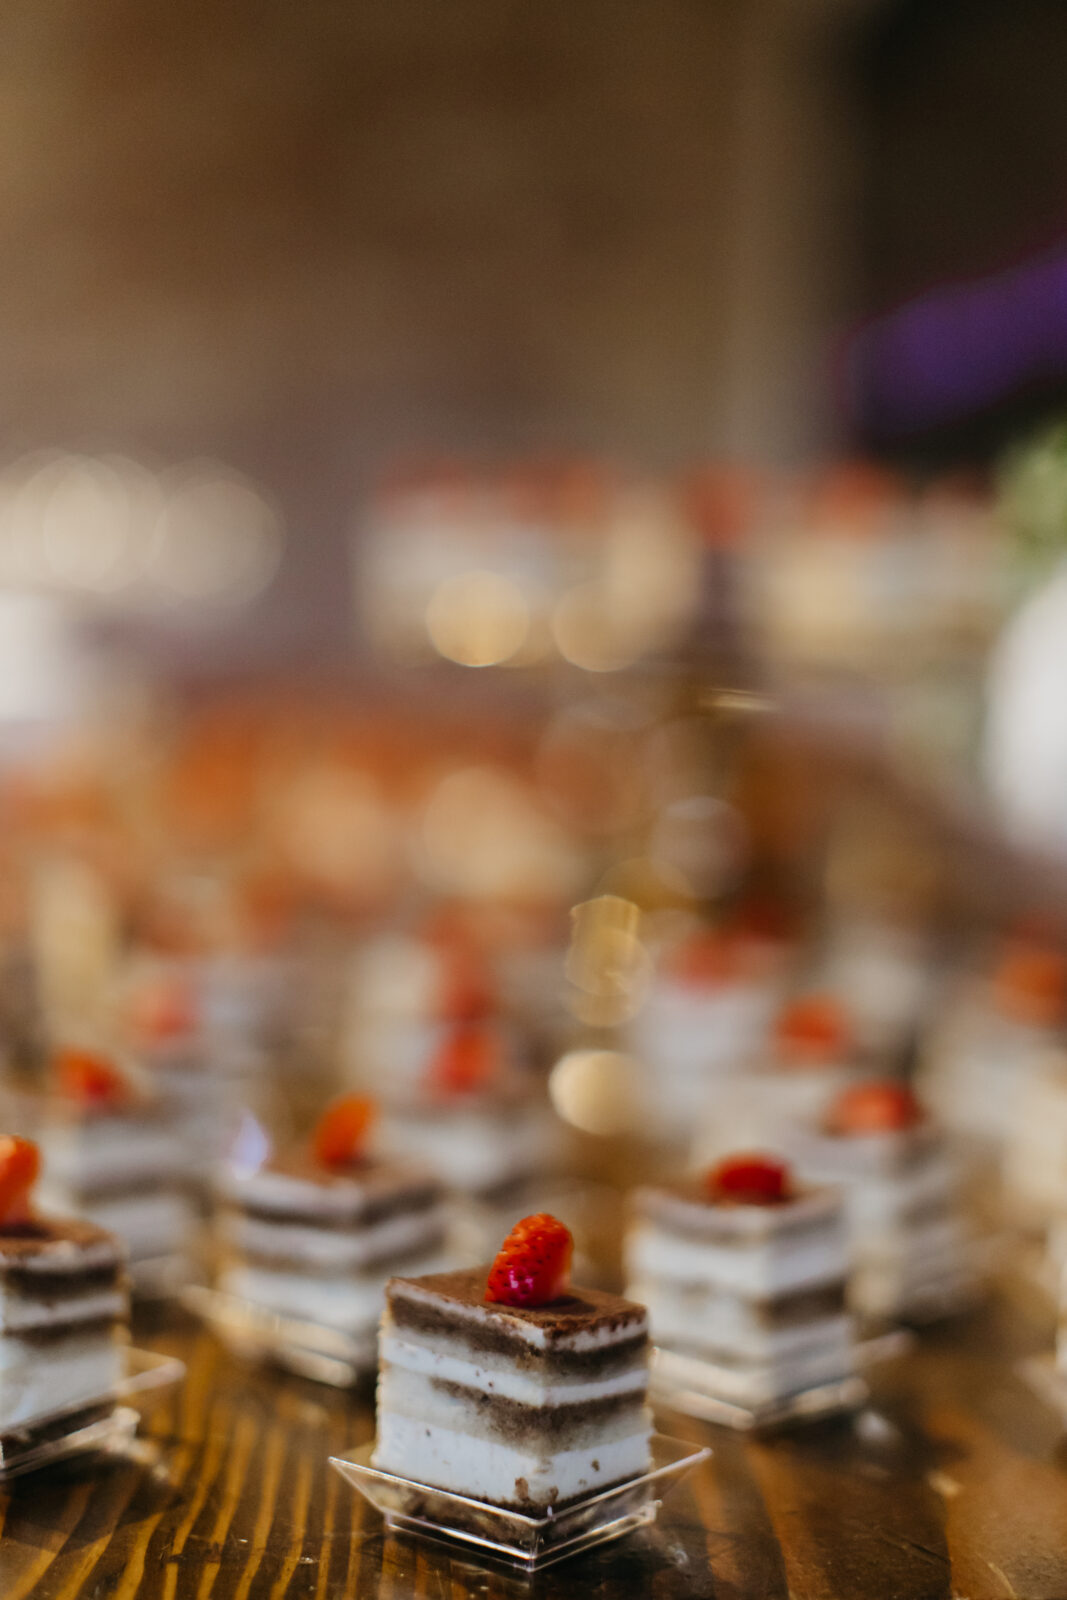 Desserts served at the reception during a wedding day